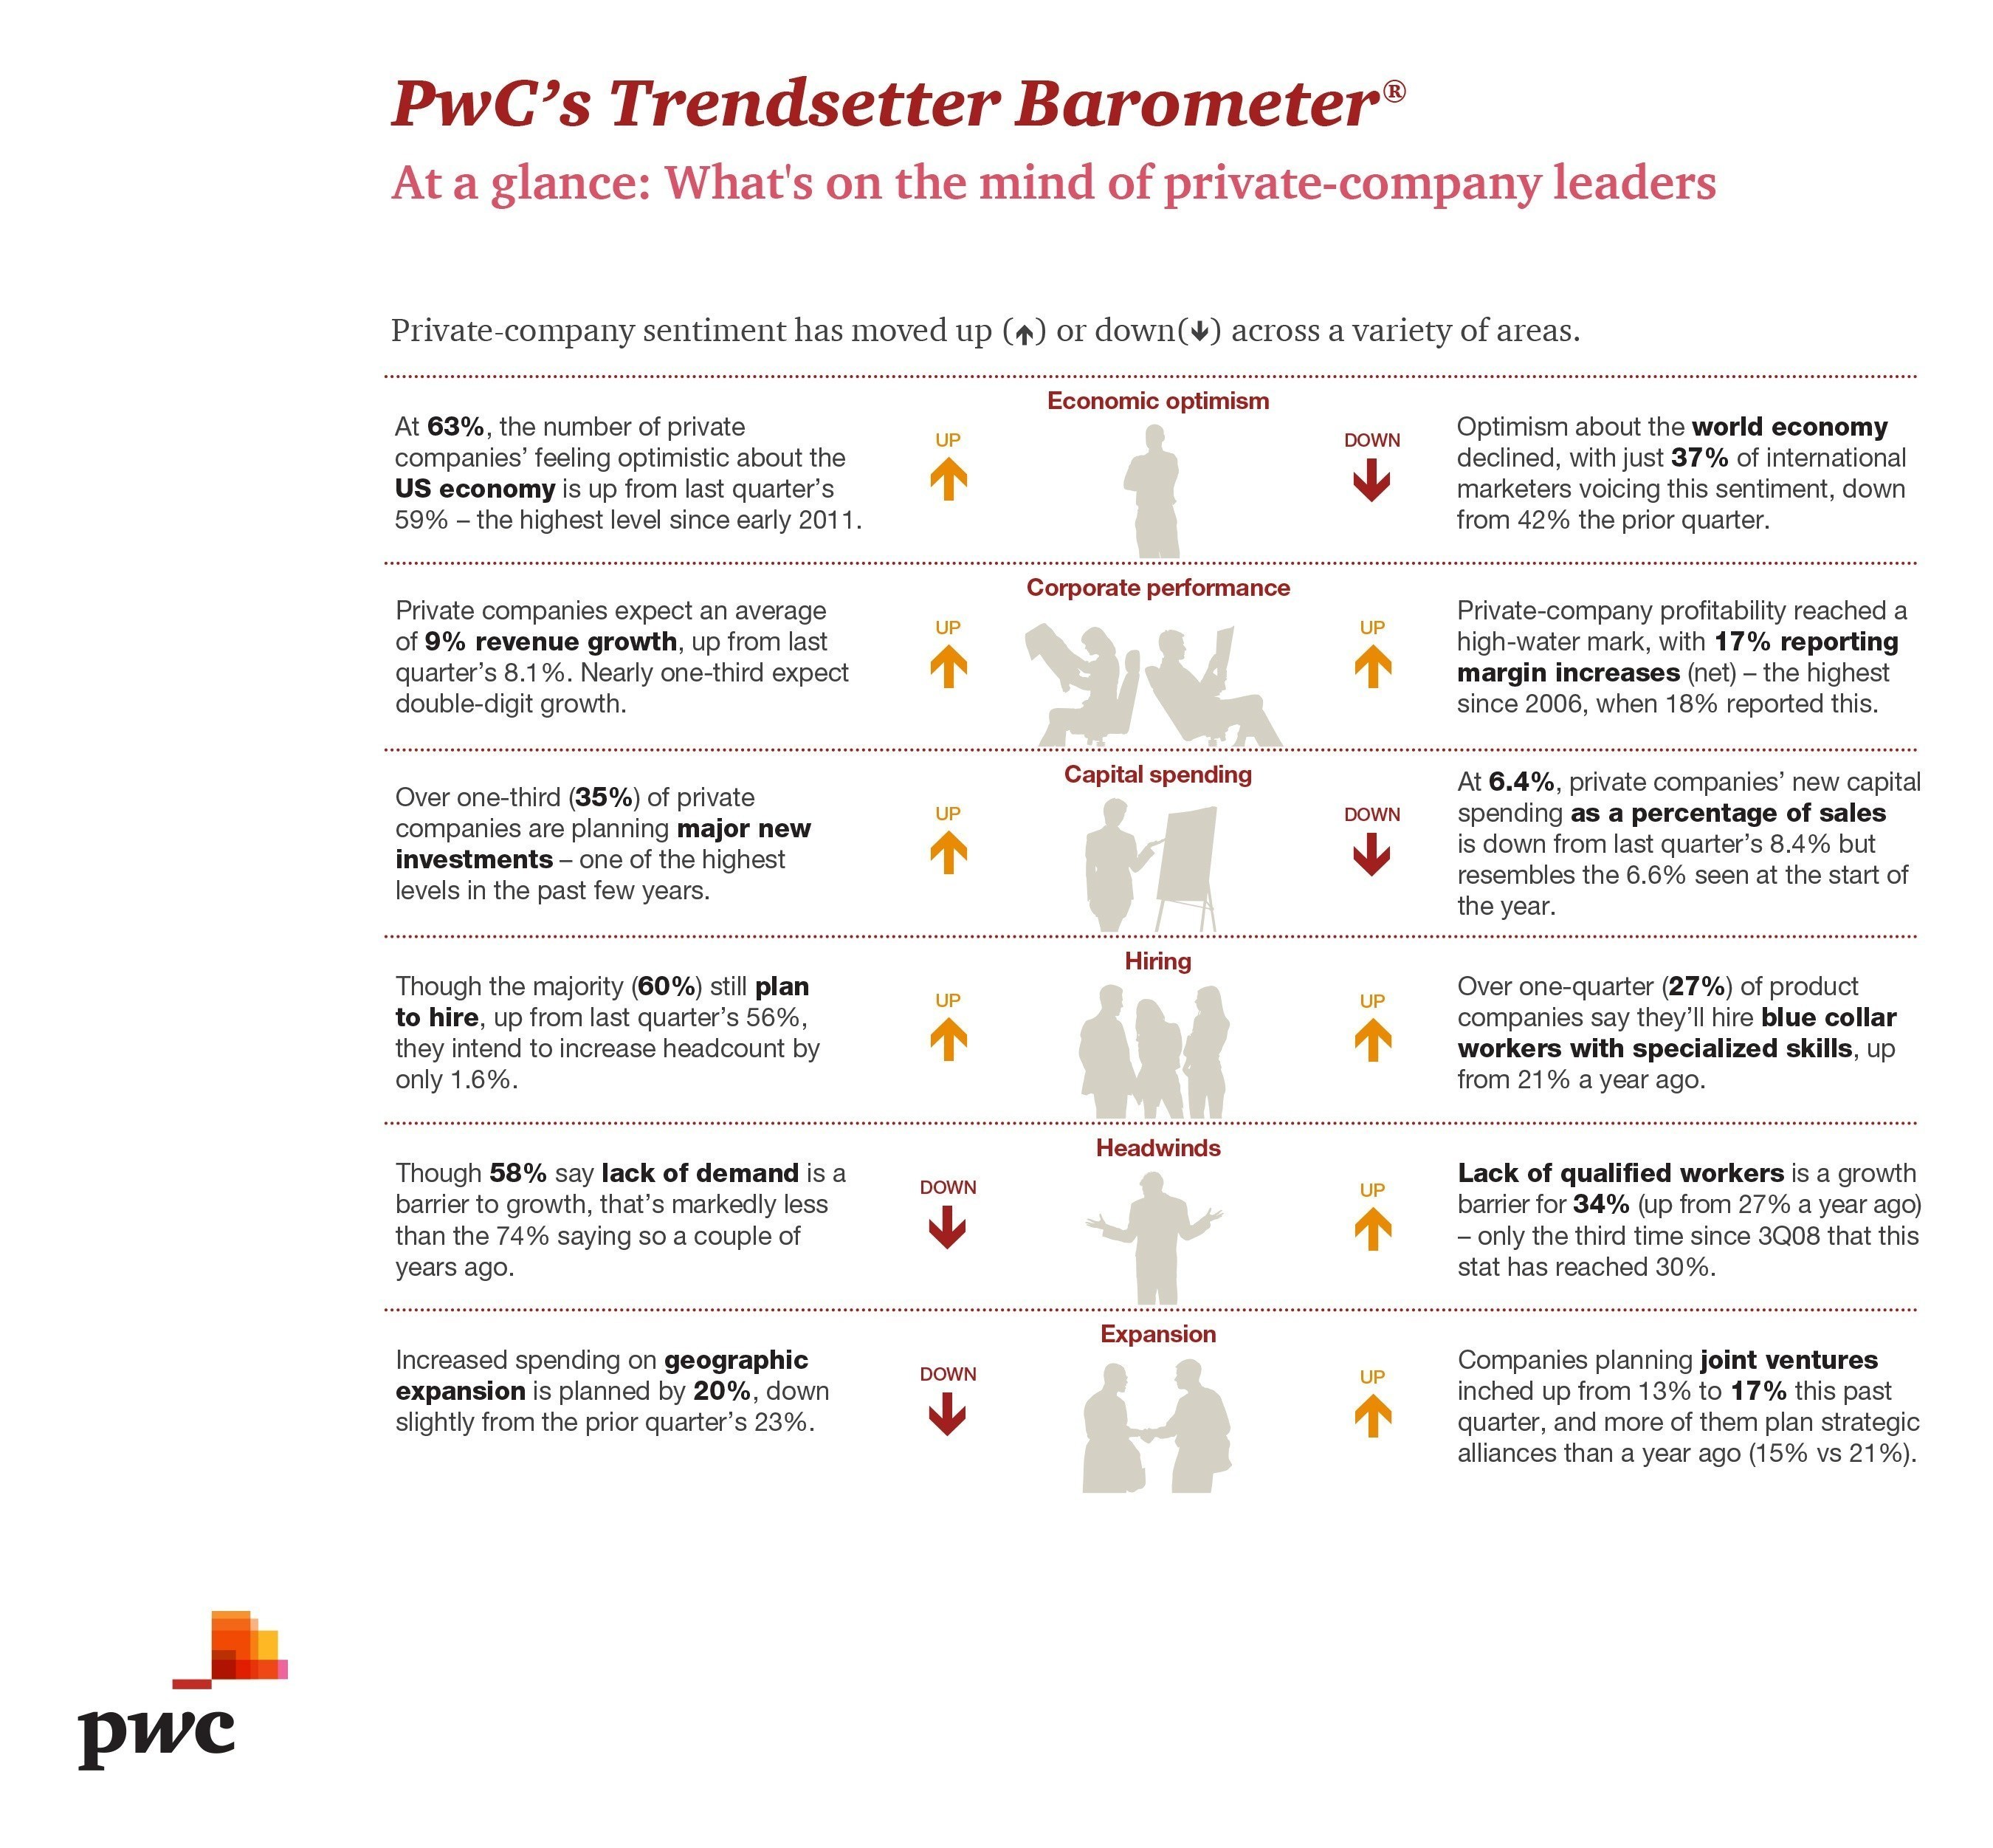 In the quarter running up to the midterm election, private companies remained intent on growth, felt good about the US economy, and signaled greater risk appetite. And decidedly more of them reported profitability increases than we've seen in quite some time. Even so, wage hikes and hiring remain modest at these companies, and the world economy is giving them pause. Read PwC's Trendsetter Barometer survey report to hear what else is on private companies' minds.